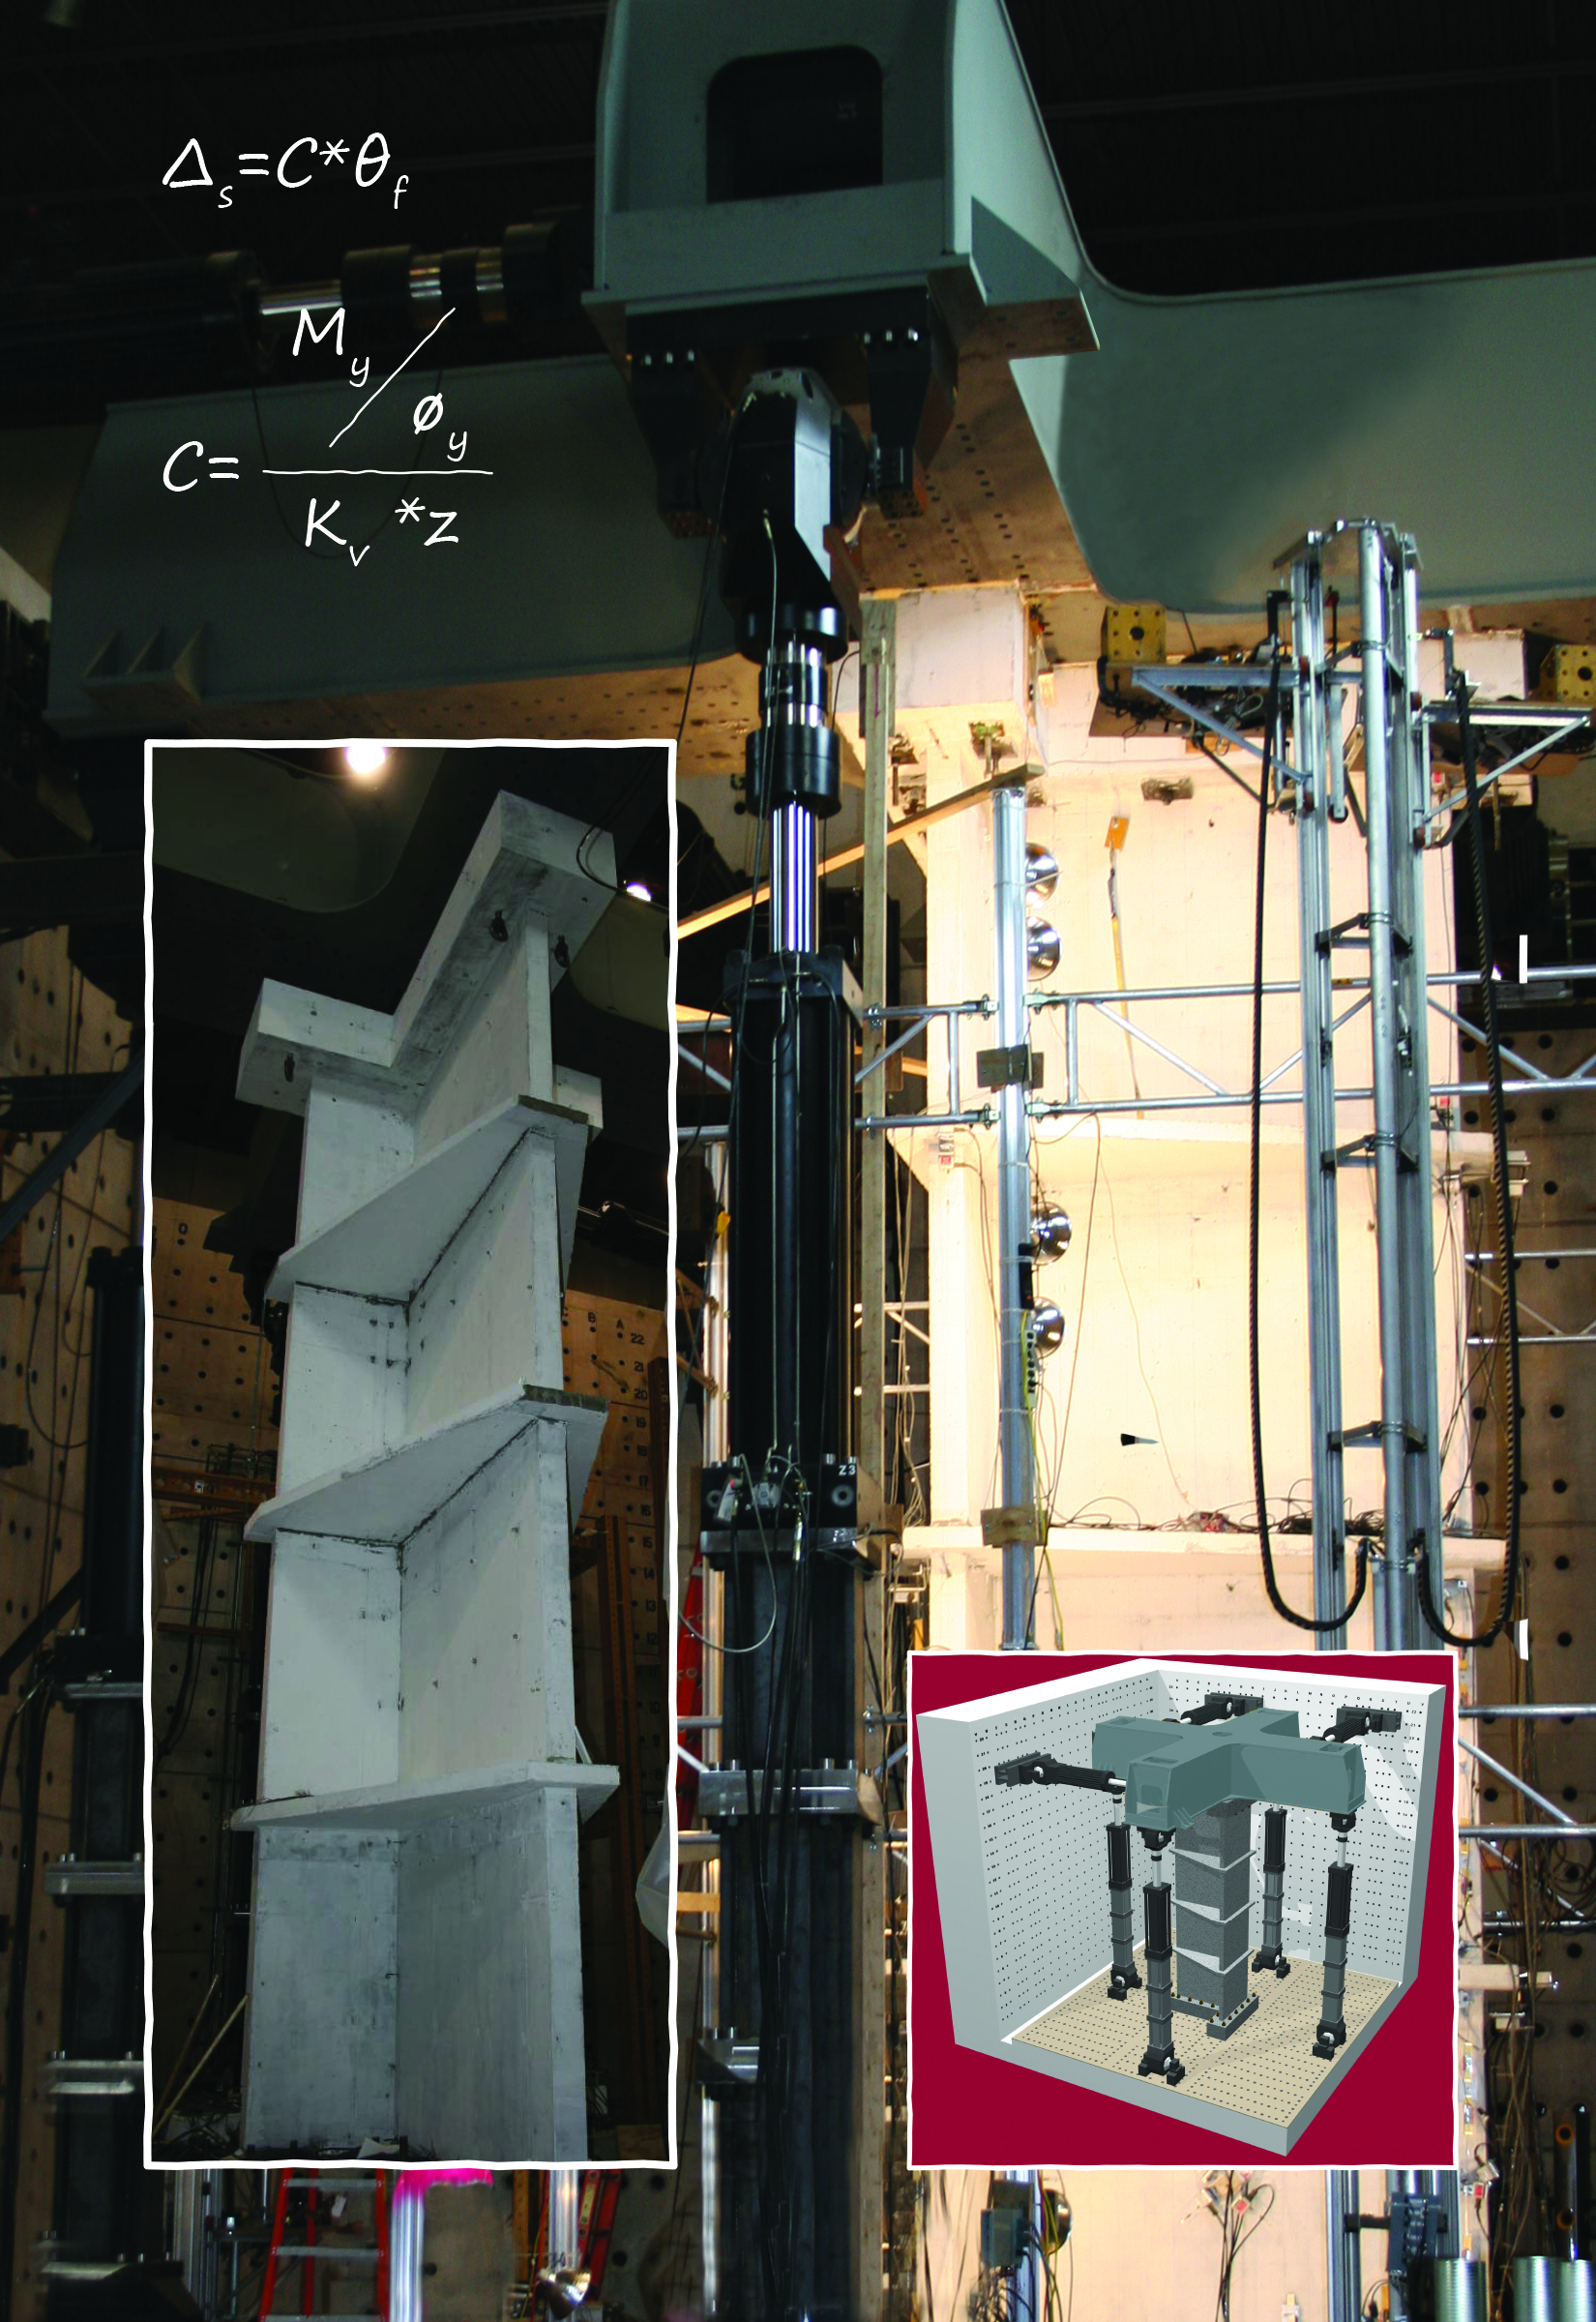 Image of reinforced concrete walls in the UMN MAST Laboratory